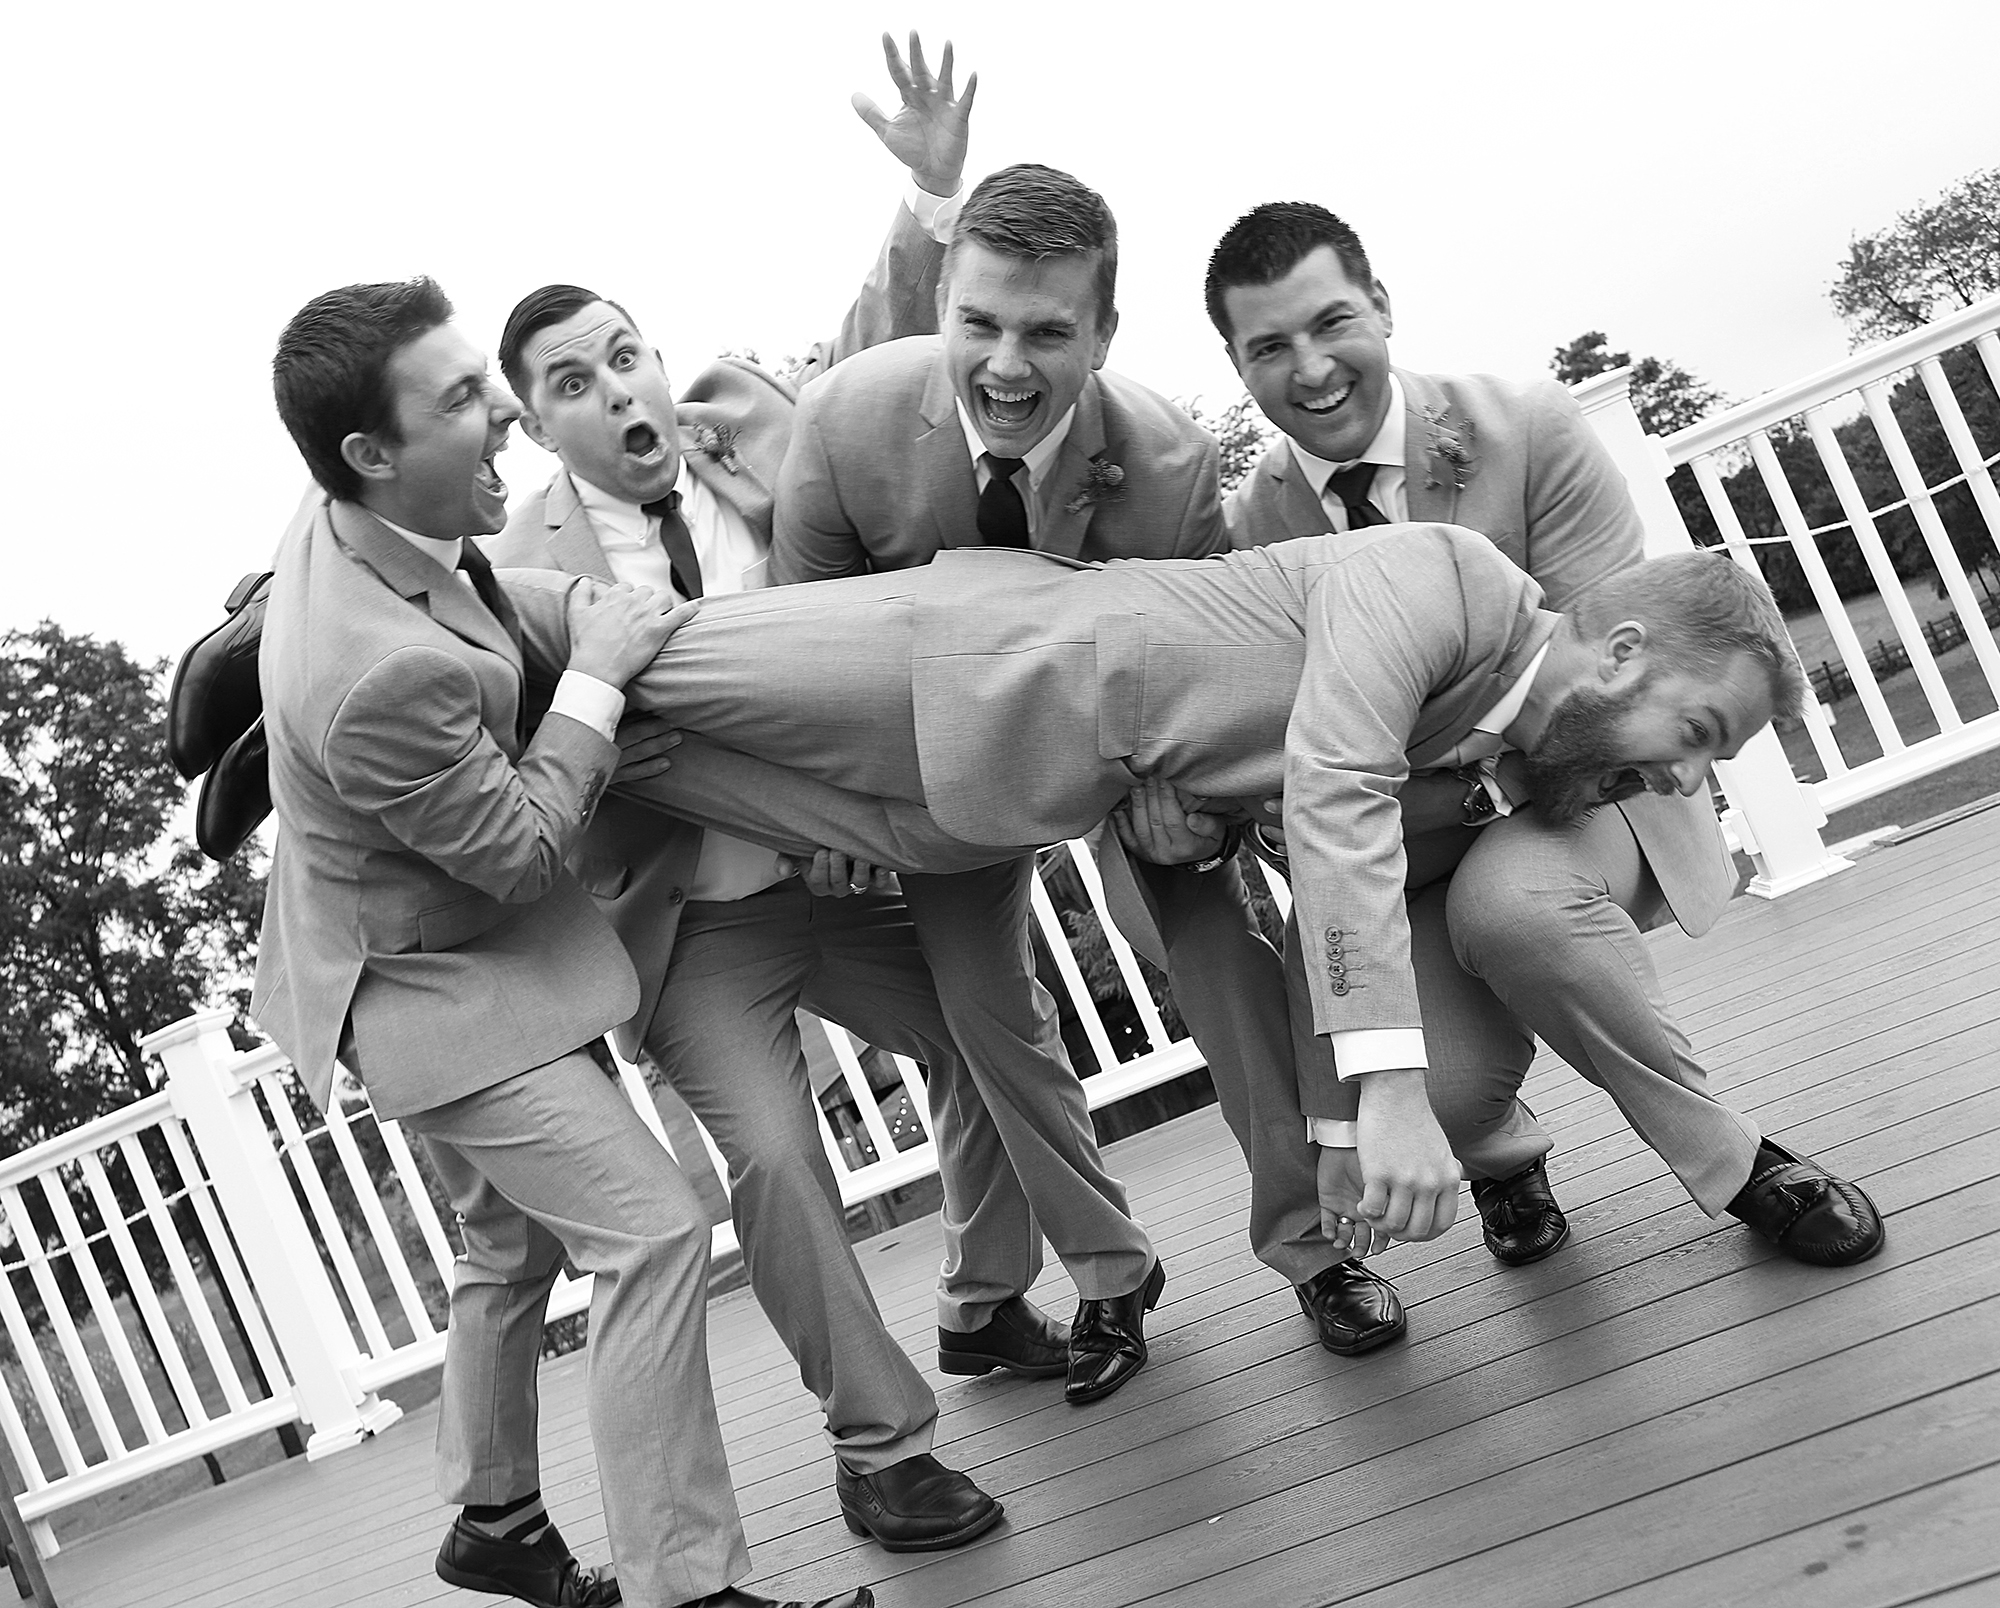 Groomsmen joyfully lift the radiant bride on a deck, their faces alight with happiness and celebration in this delightful and spirited moment.